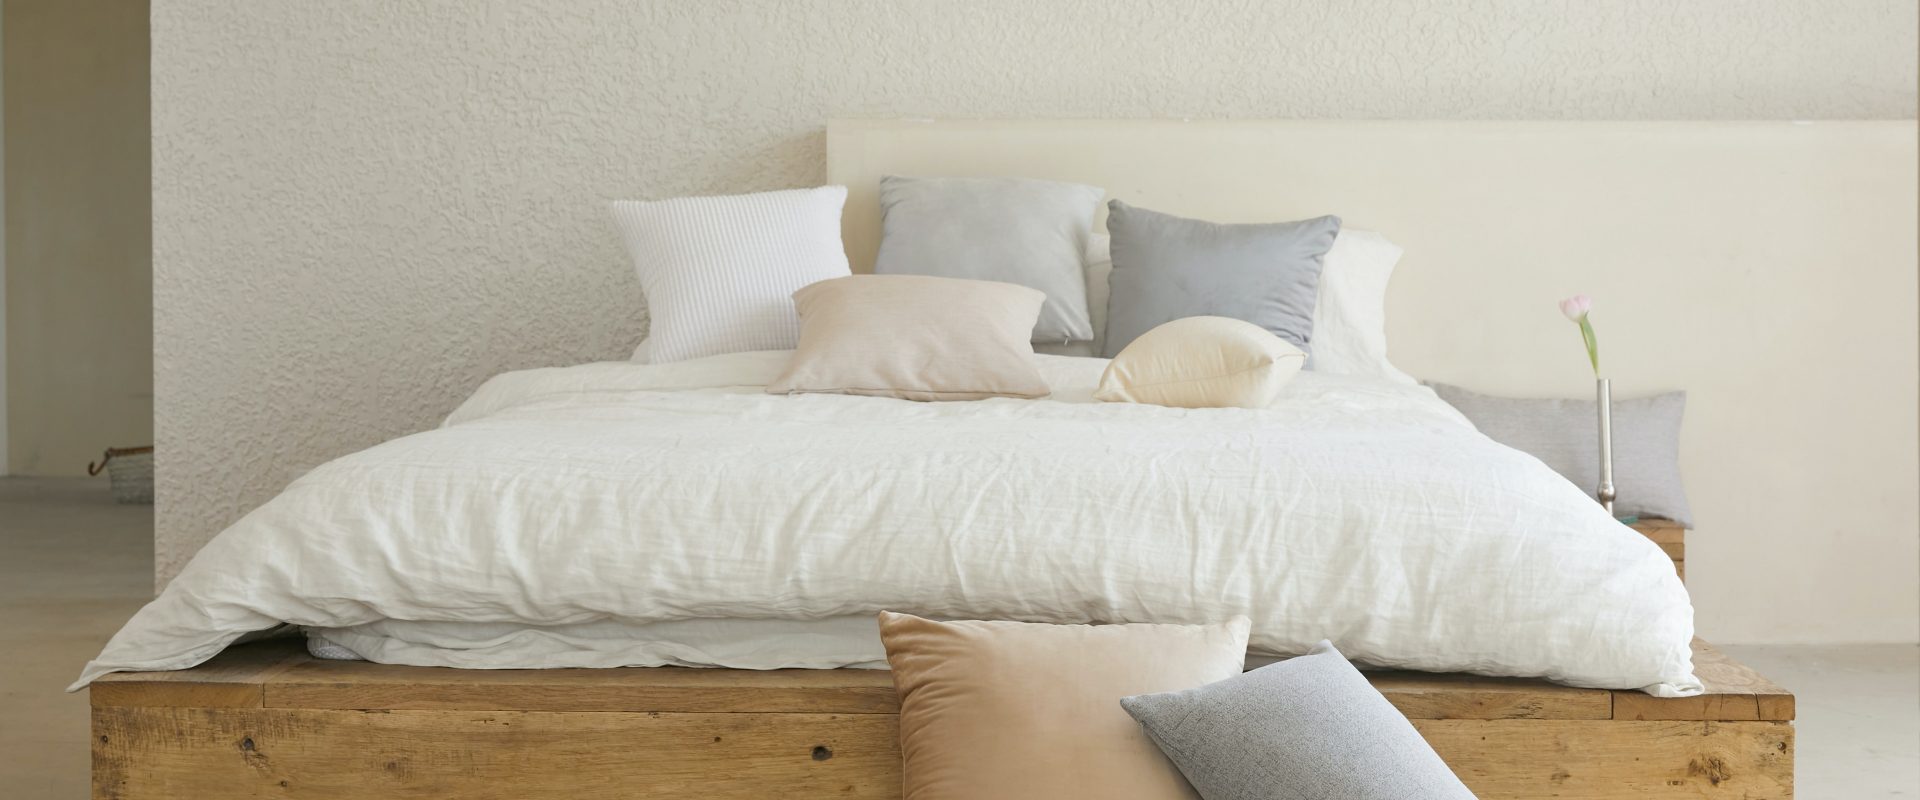 This is how often you should wash your pillows